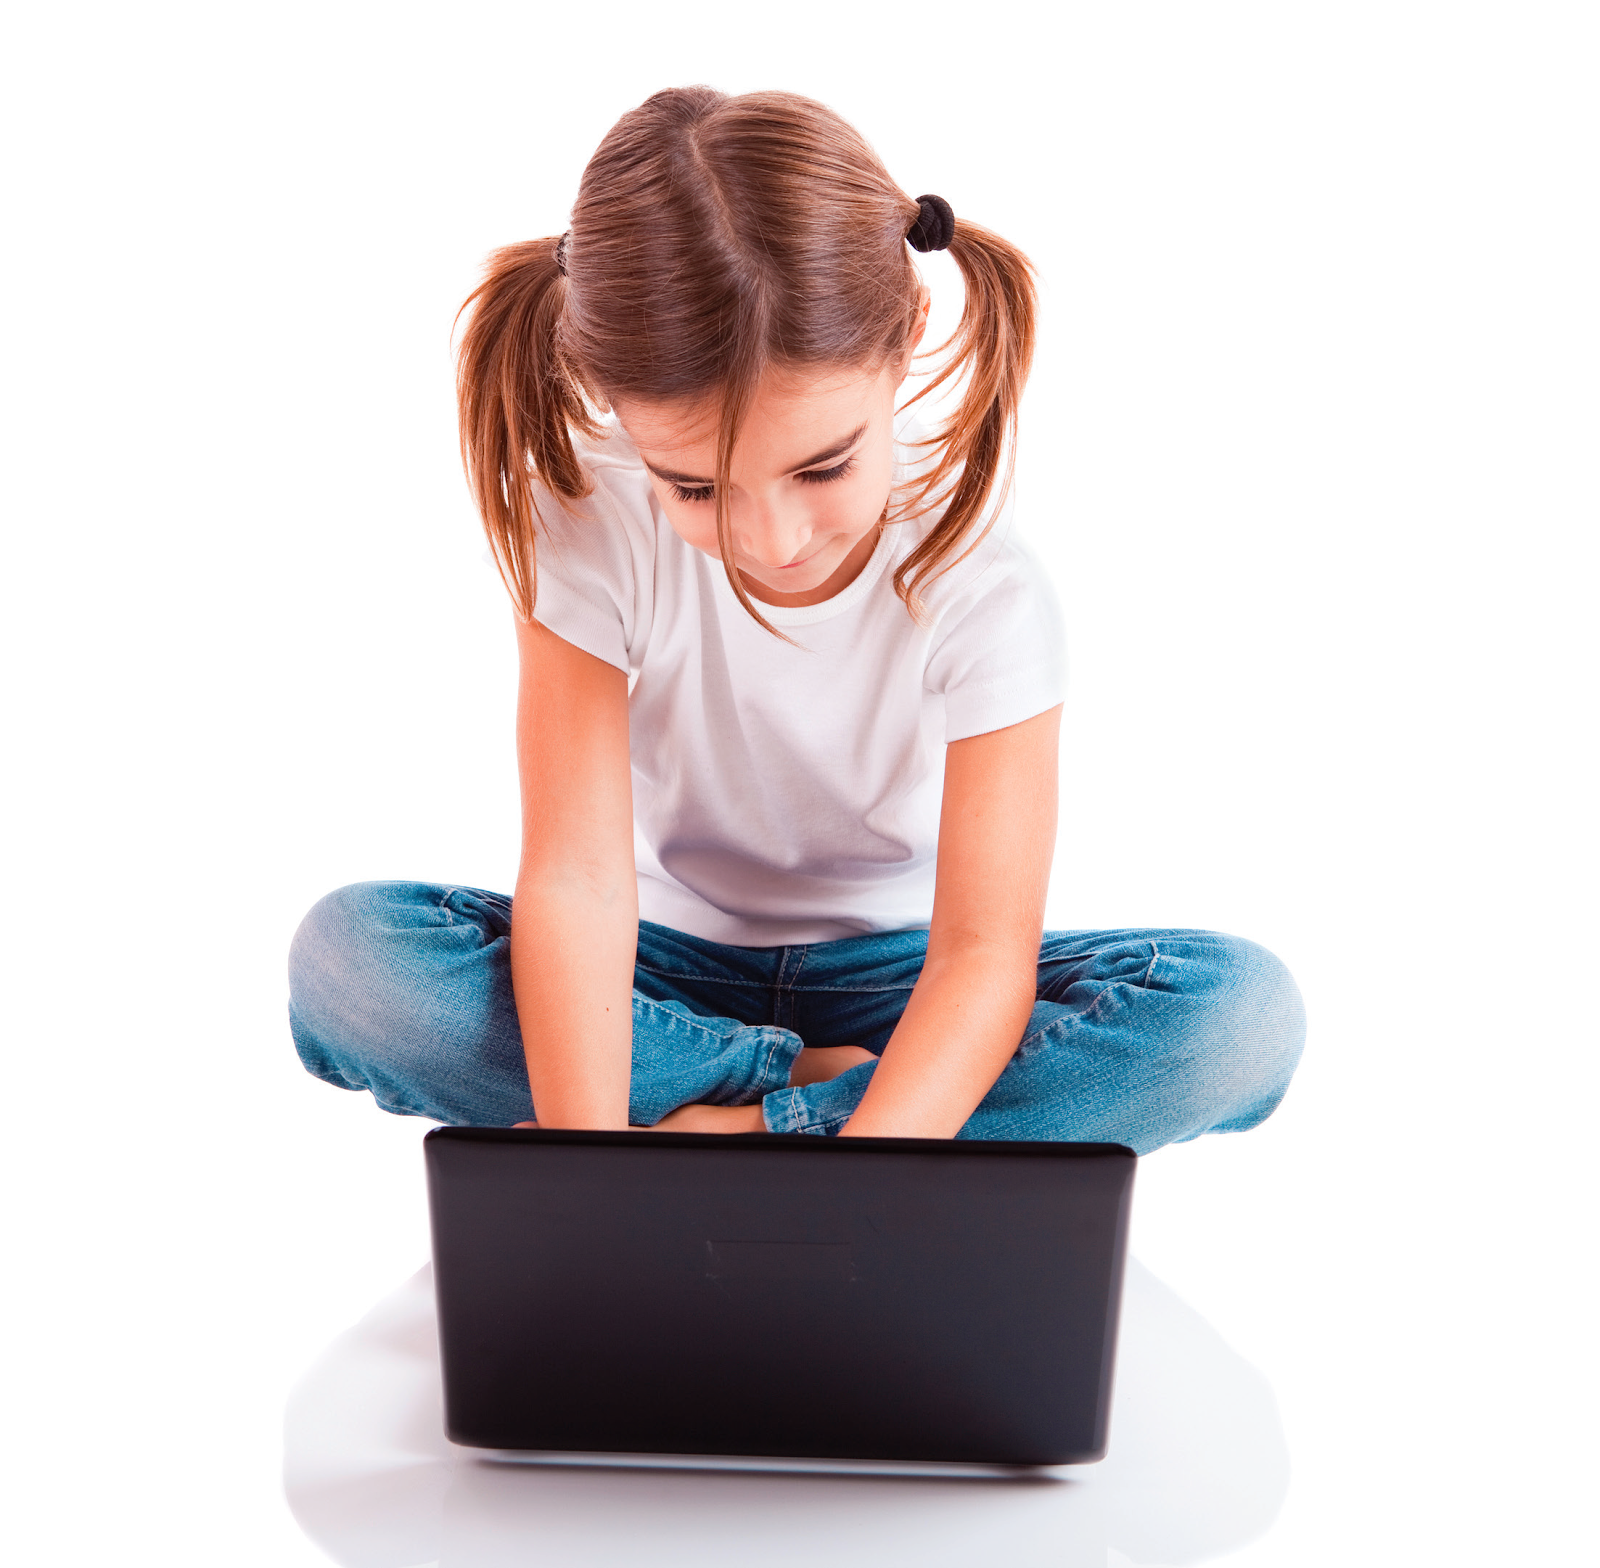 MOMMY MATTERS: Keeping Kids Safe in a Digital World: A Solution That Works